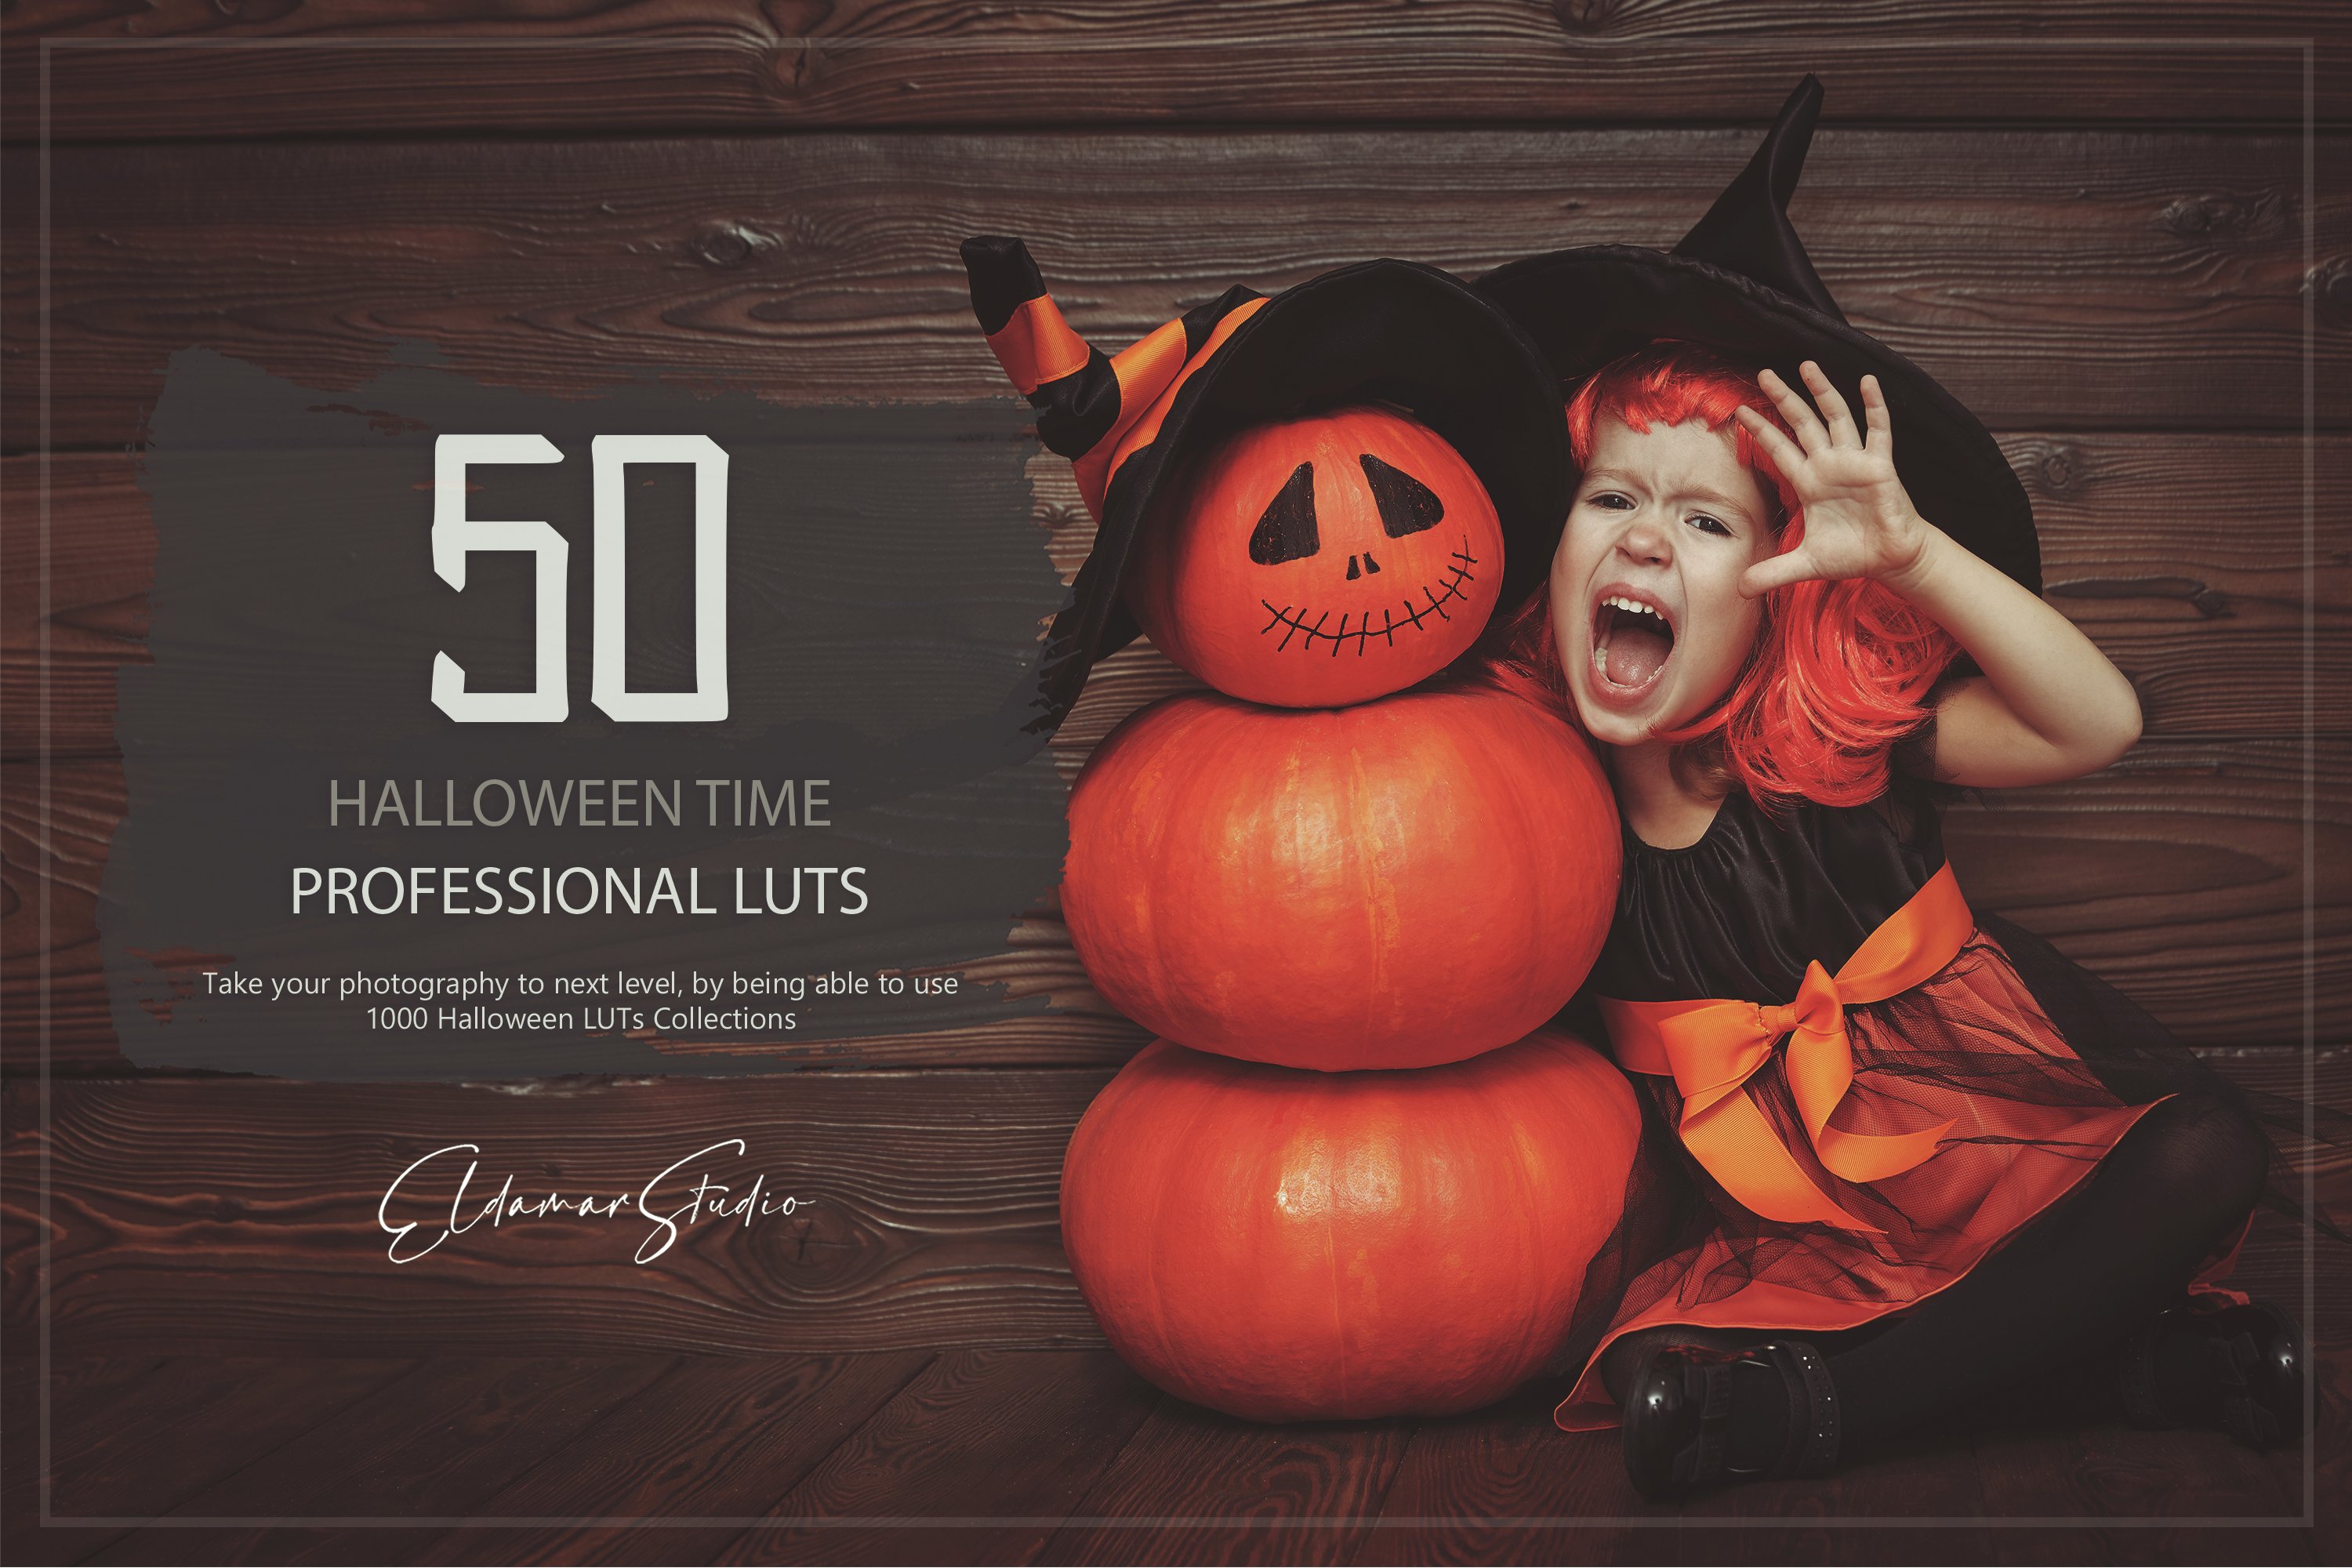 50 Halloween Time LUTs and Presetscover image.